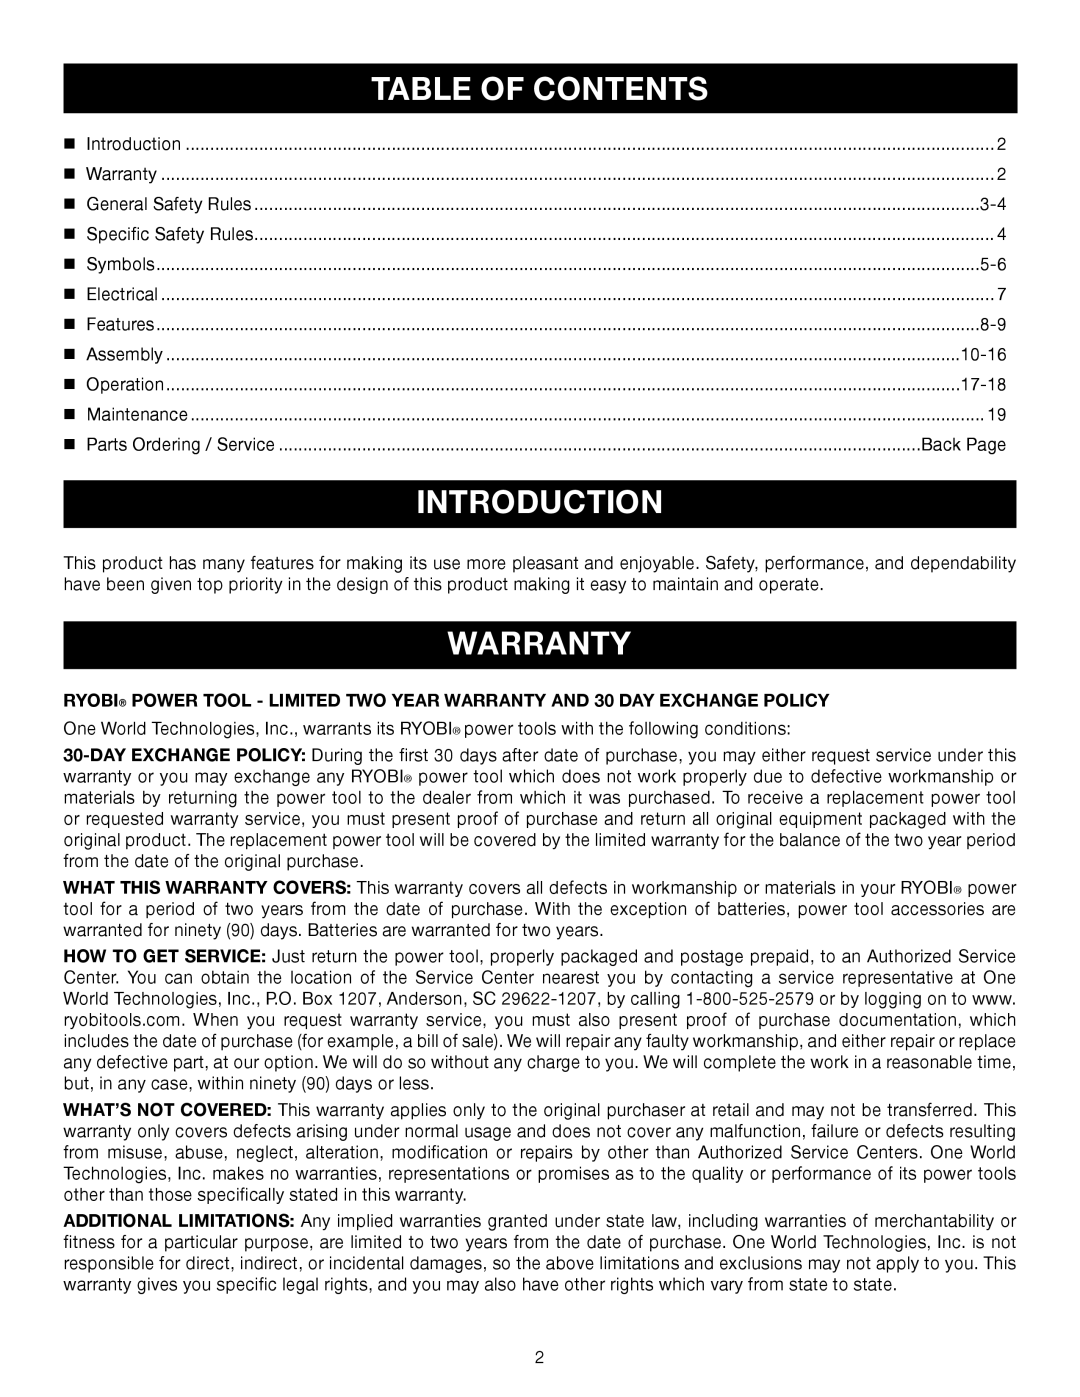 Ryobi A25RT02 manual Introduction, Warranty, Table Of Contents 